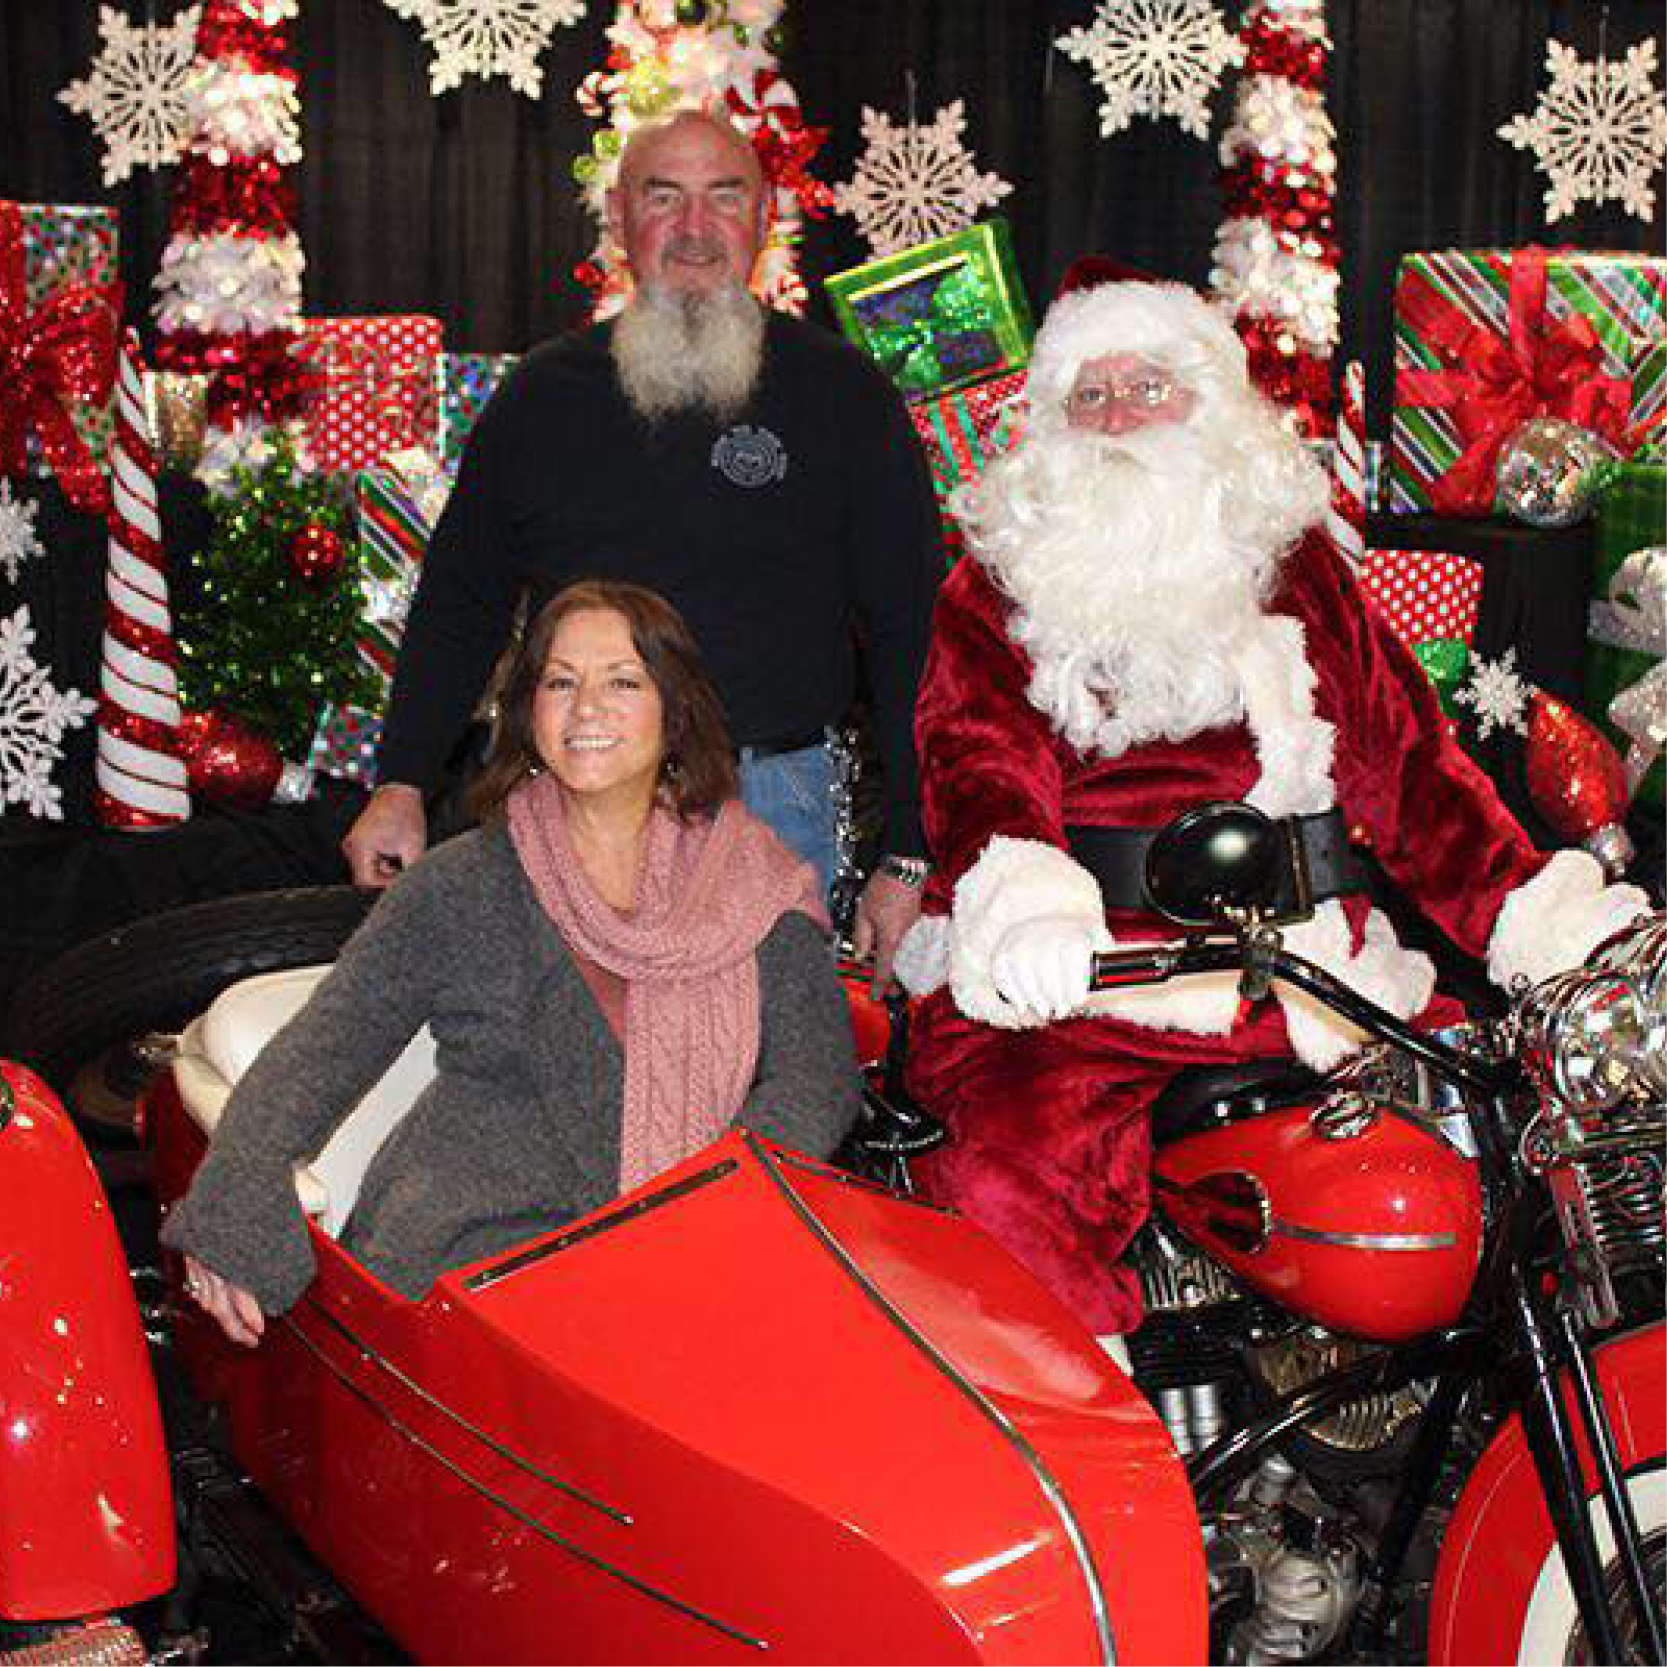 santa on a red motorcycle with a woman in the sidecar